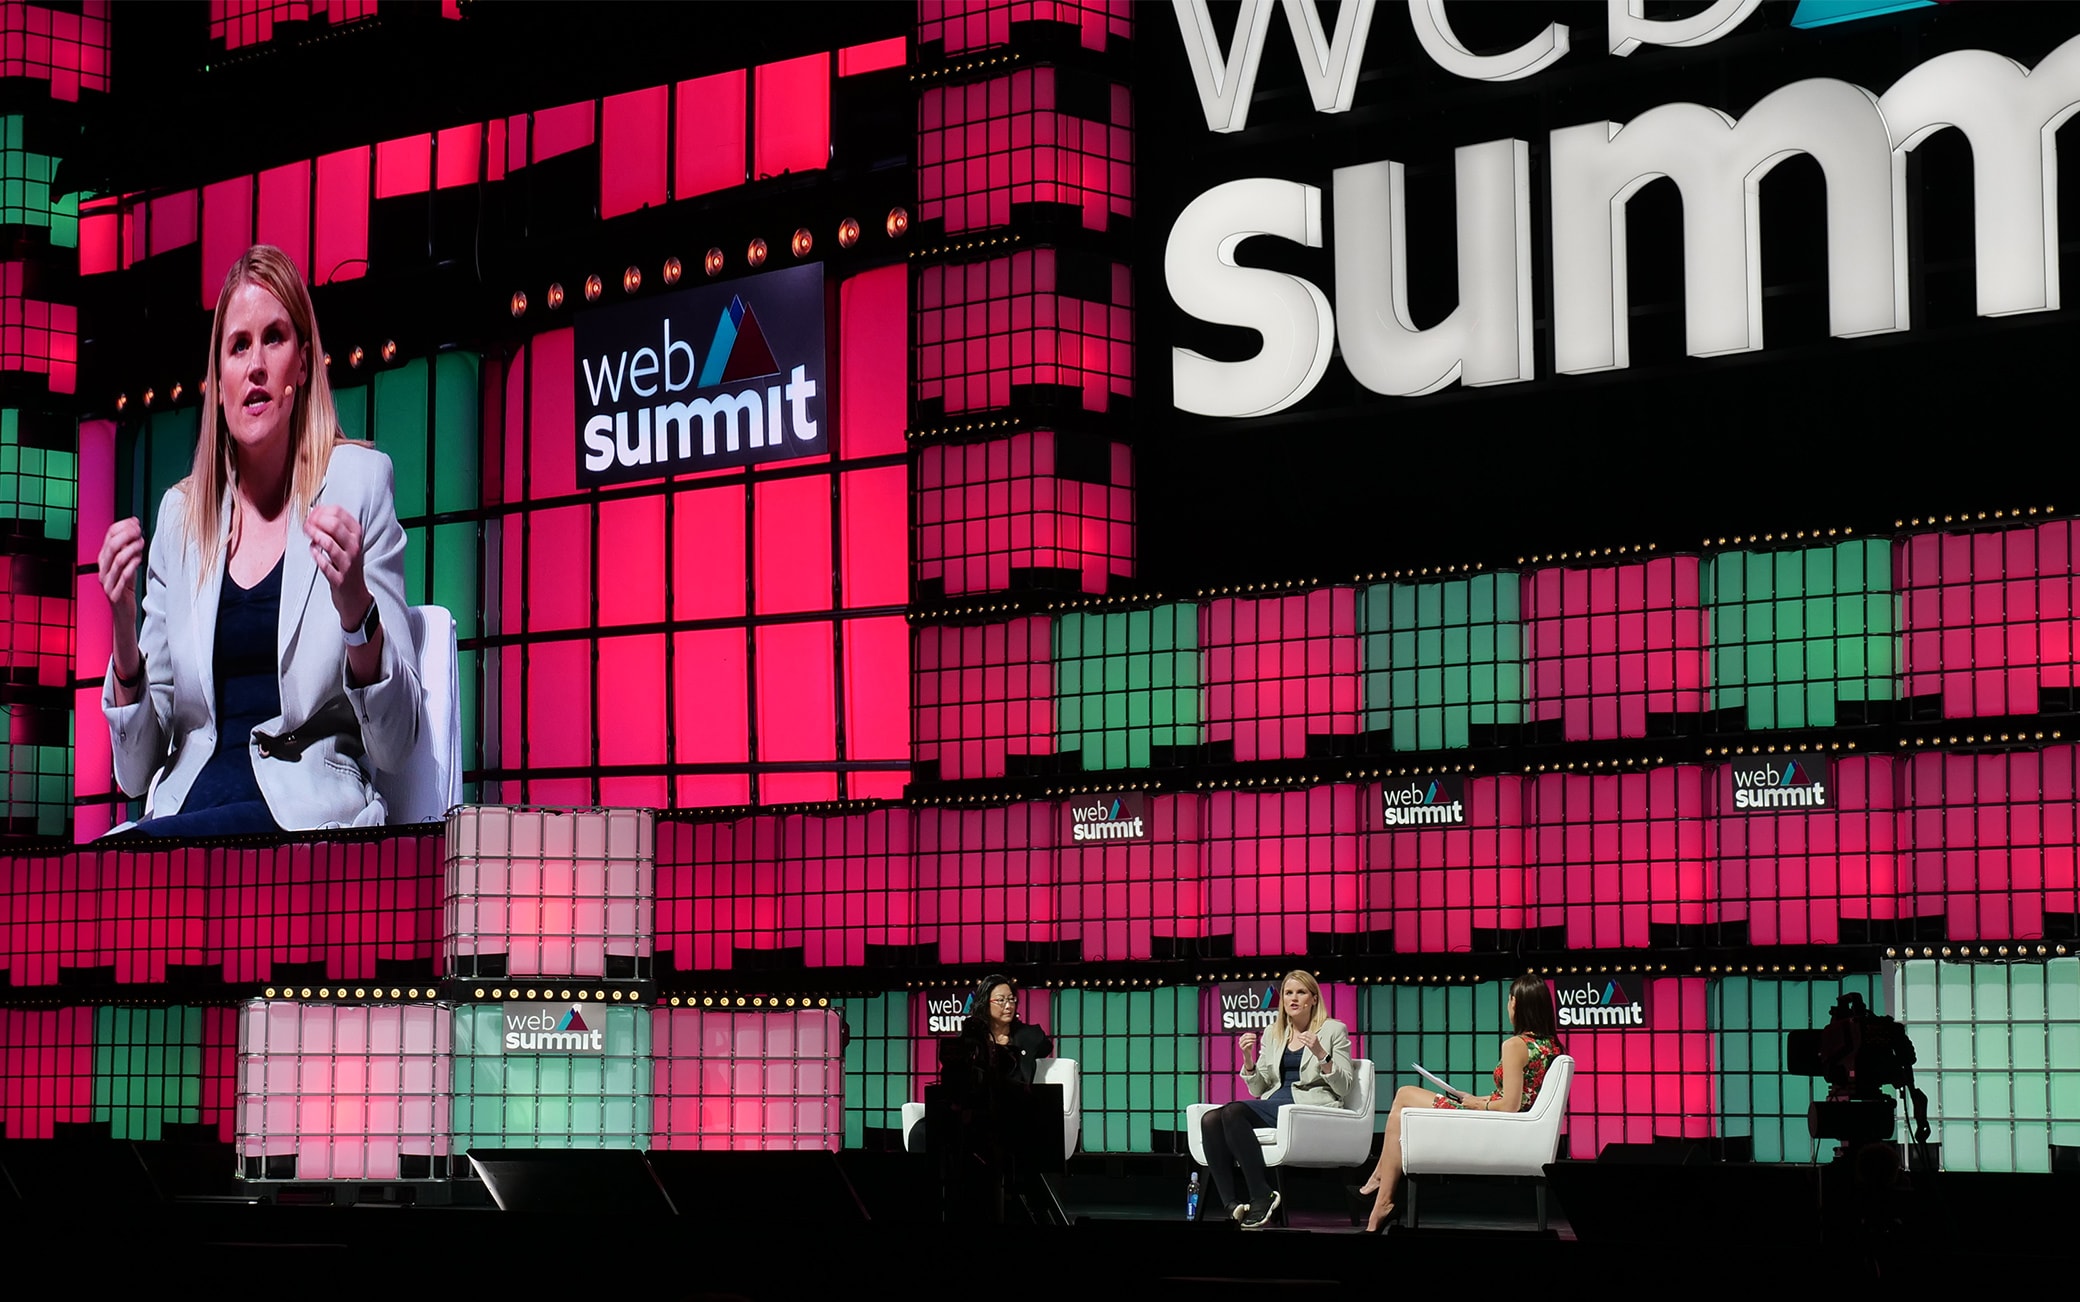 Web Summit, thousands of people in Lisbon: innovative tech projects as protagonists